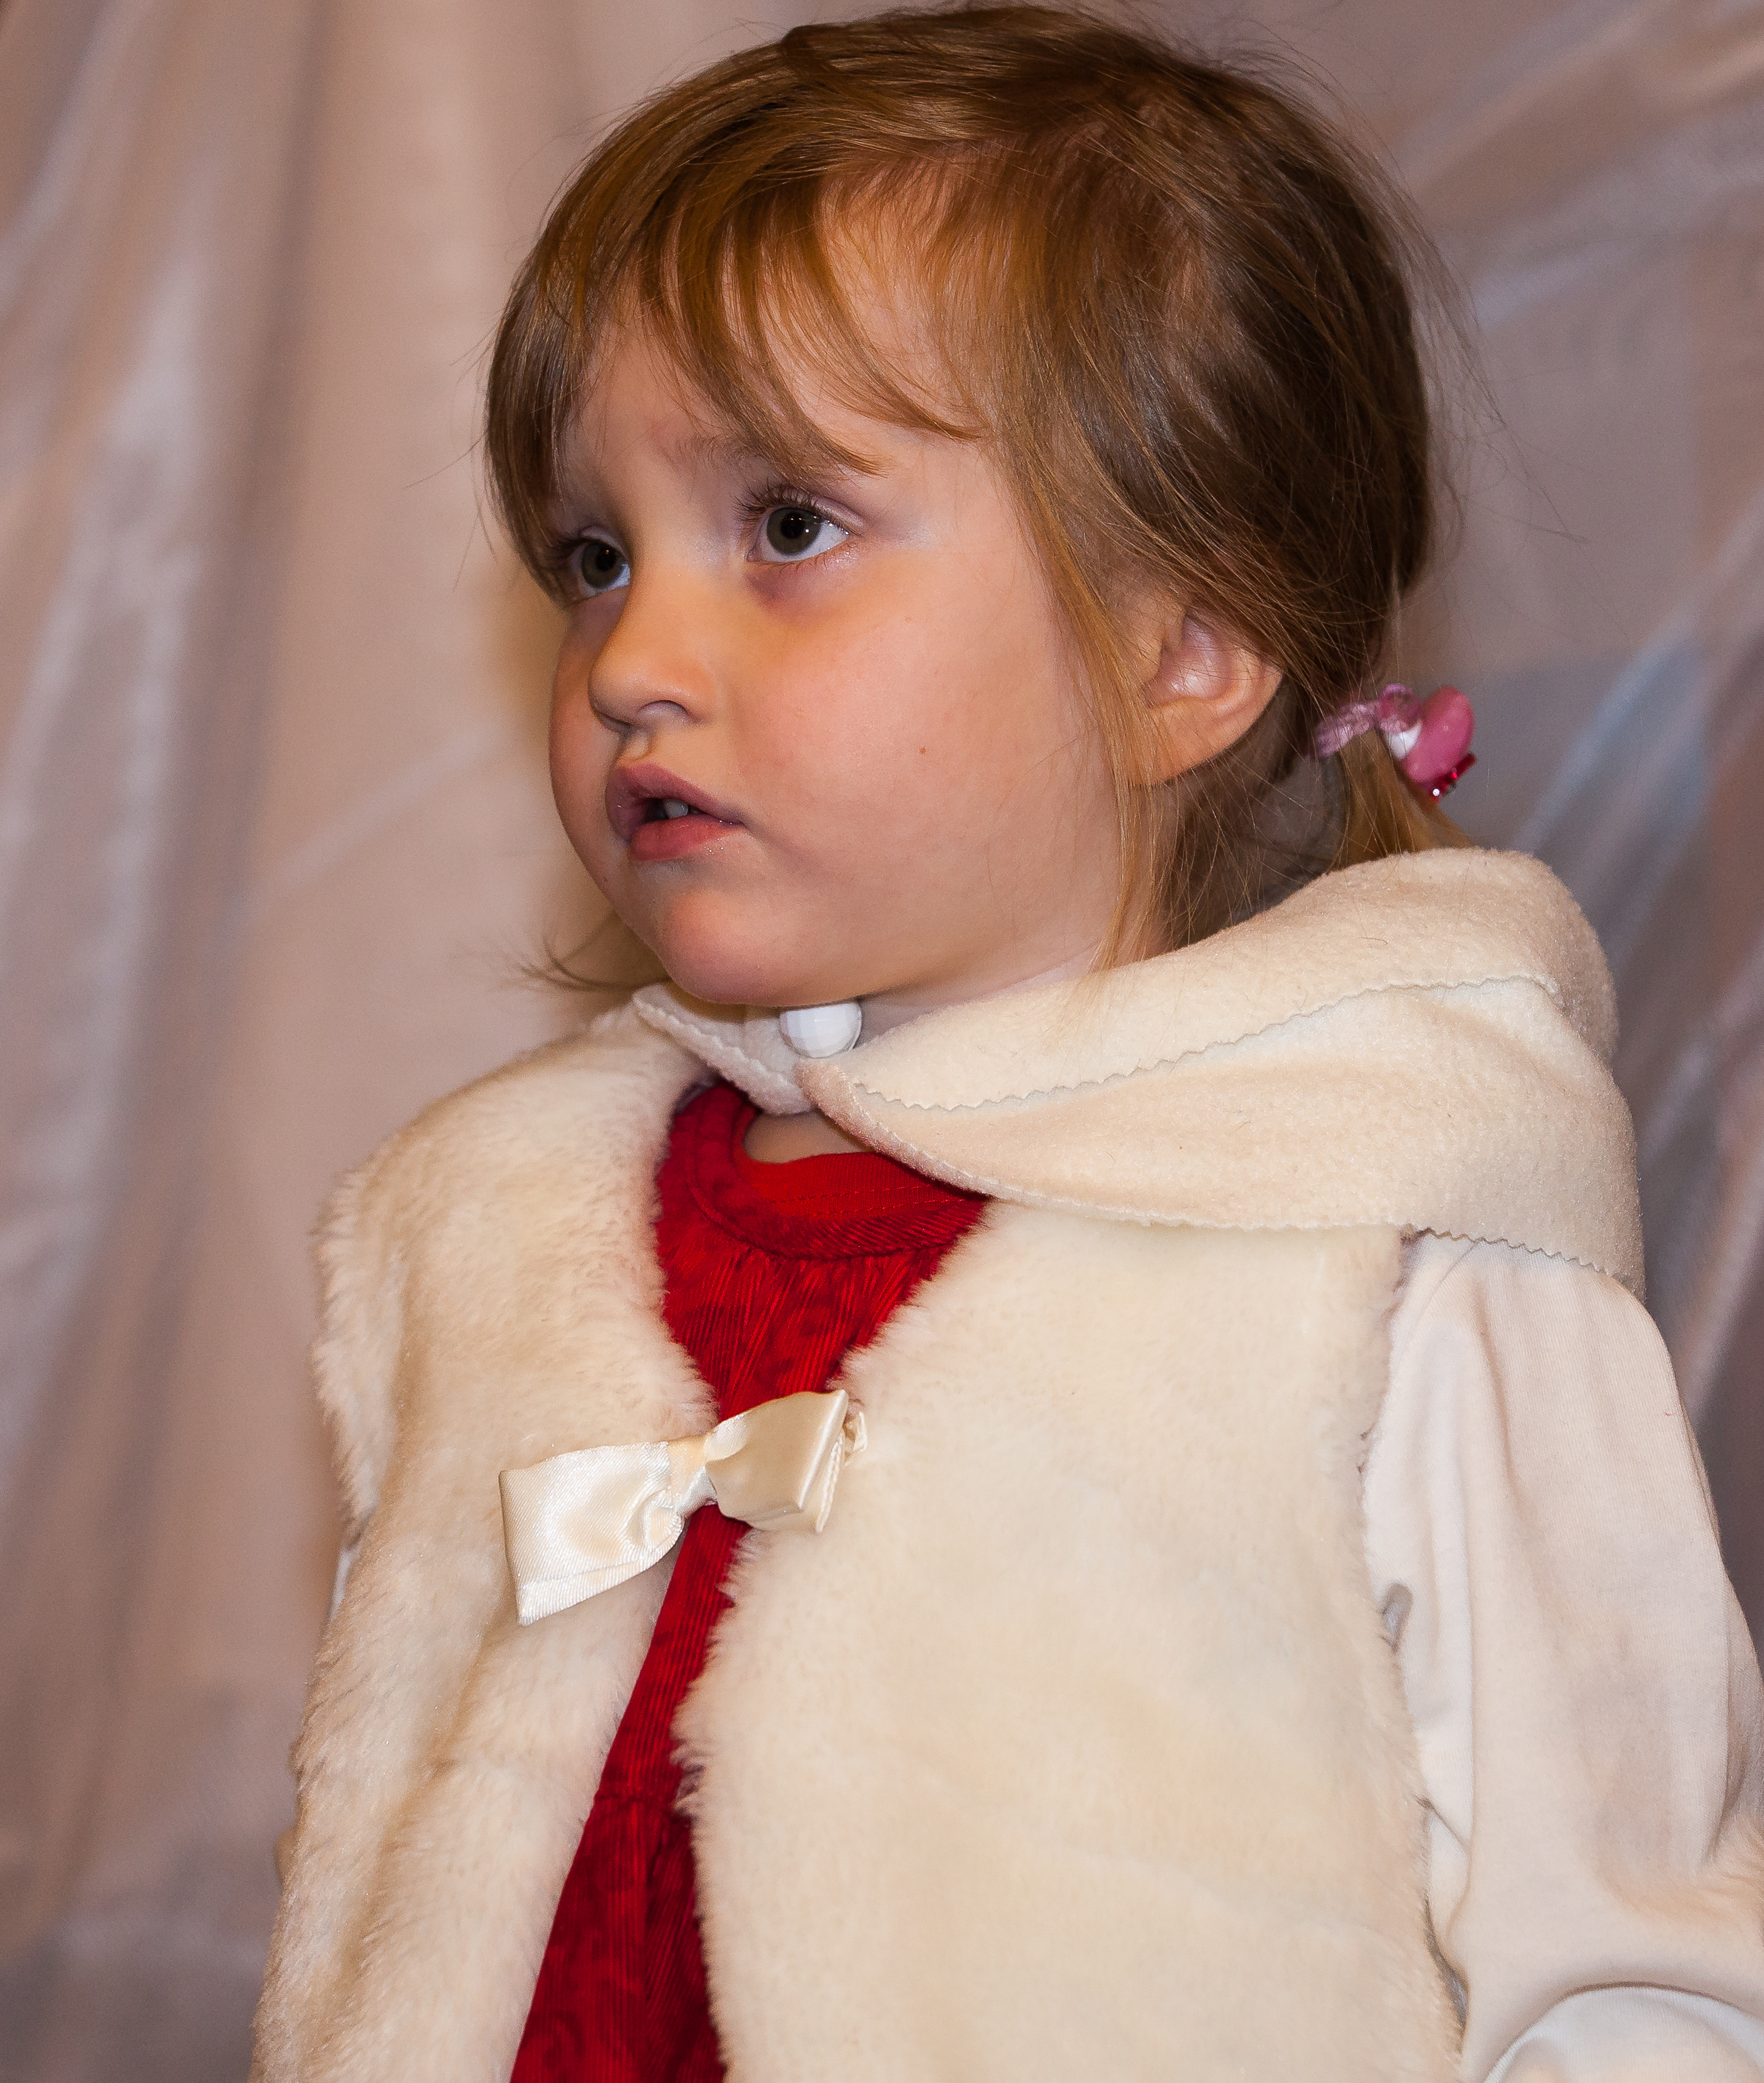 a young child girl in a Catholic kindergarten photographed in December 2013